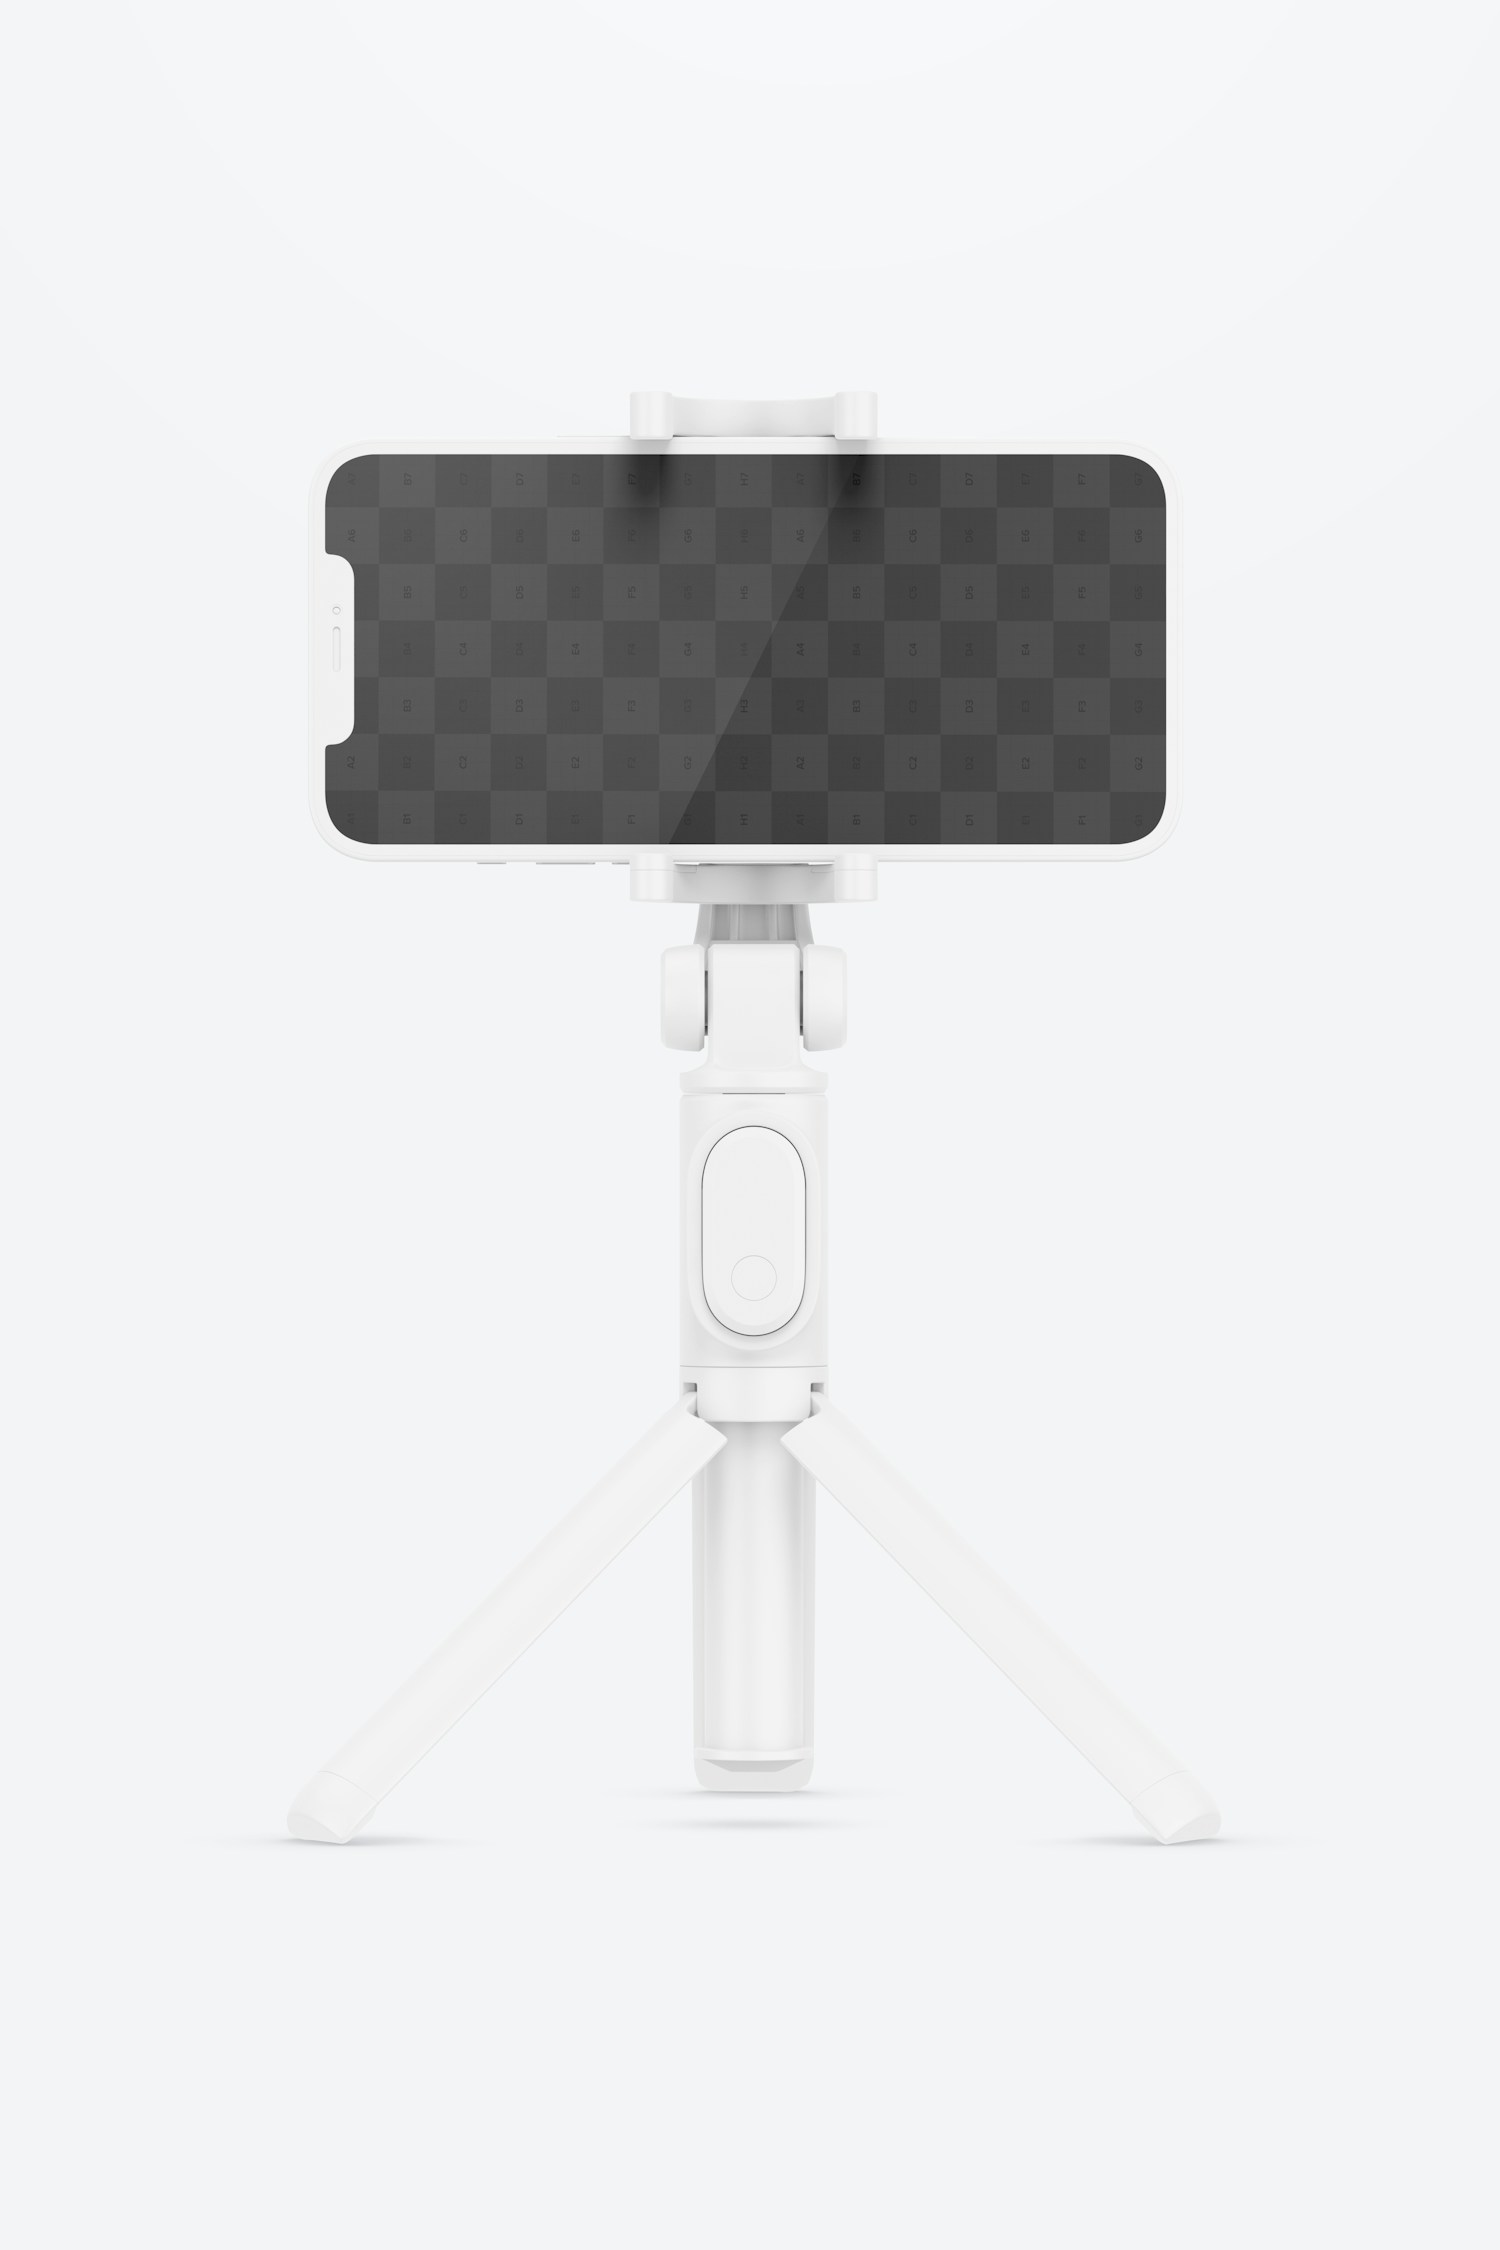 Smartphone on Tripod Mockup, Front View